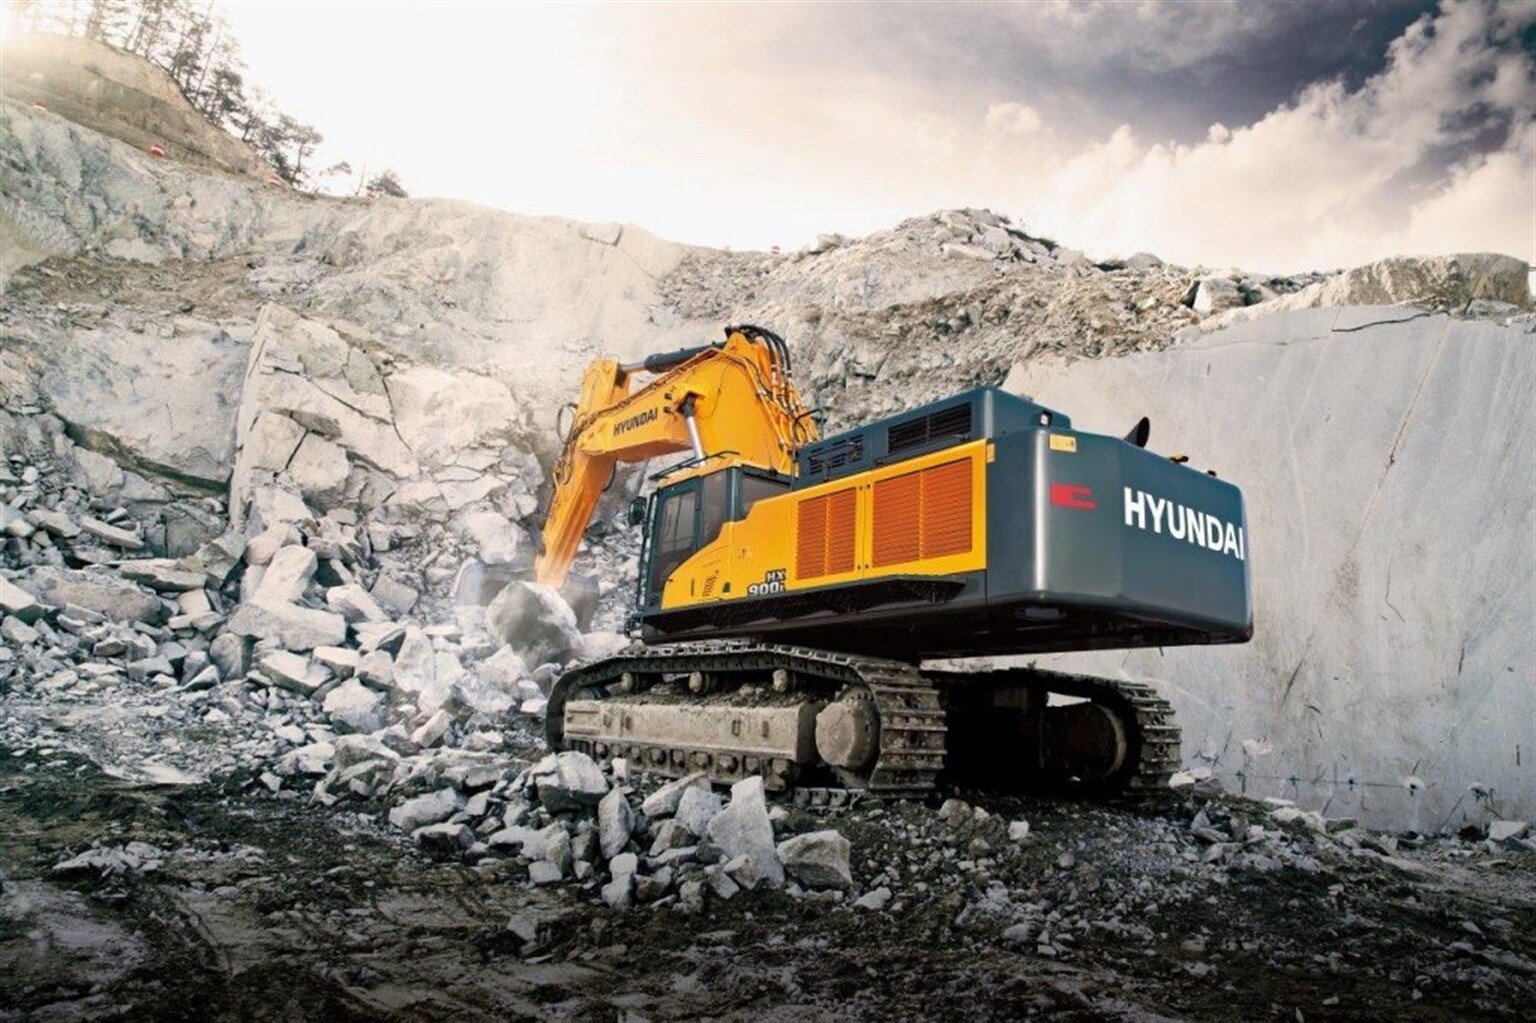 Bauma official launch for Hyundai Construction Equipment's mighty HX900 L excavator